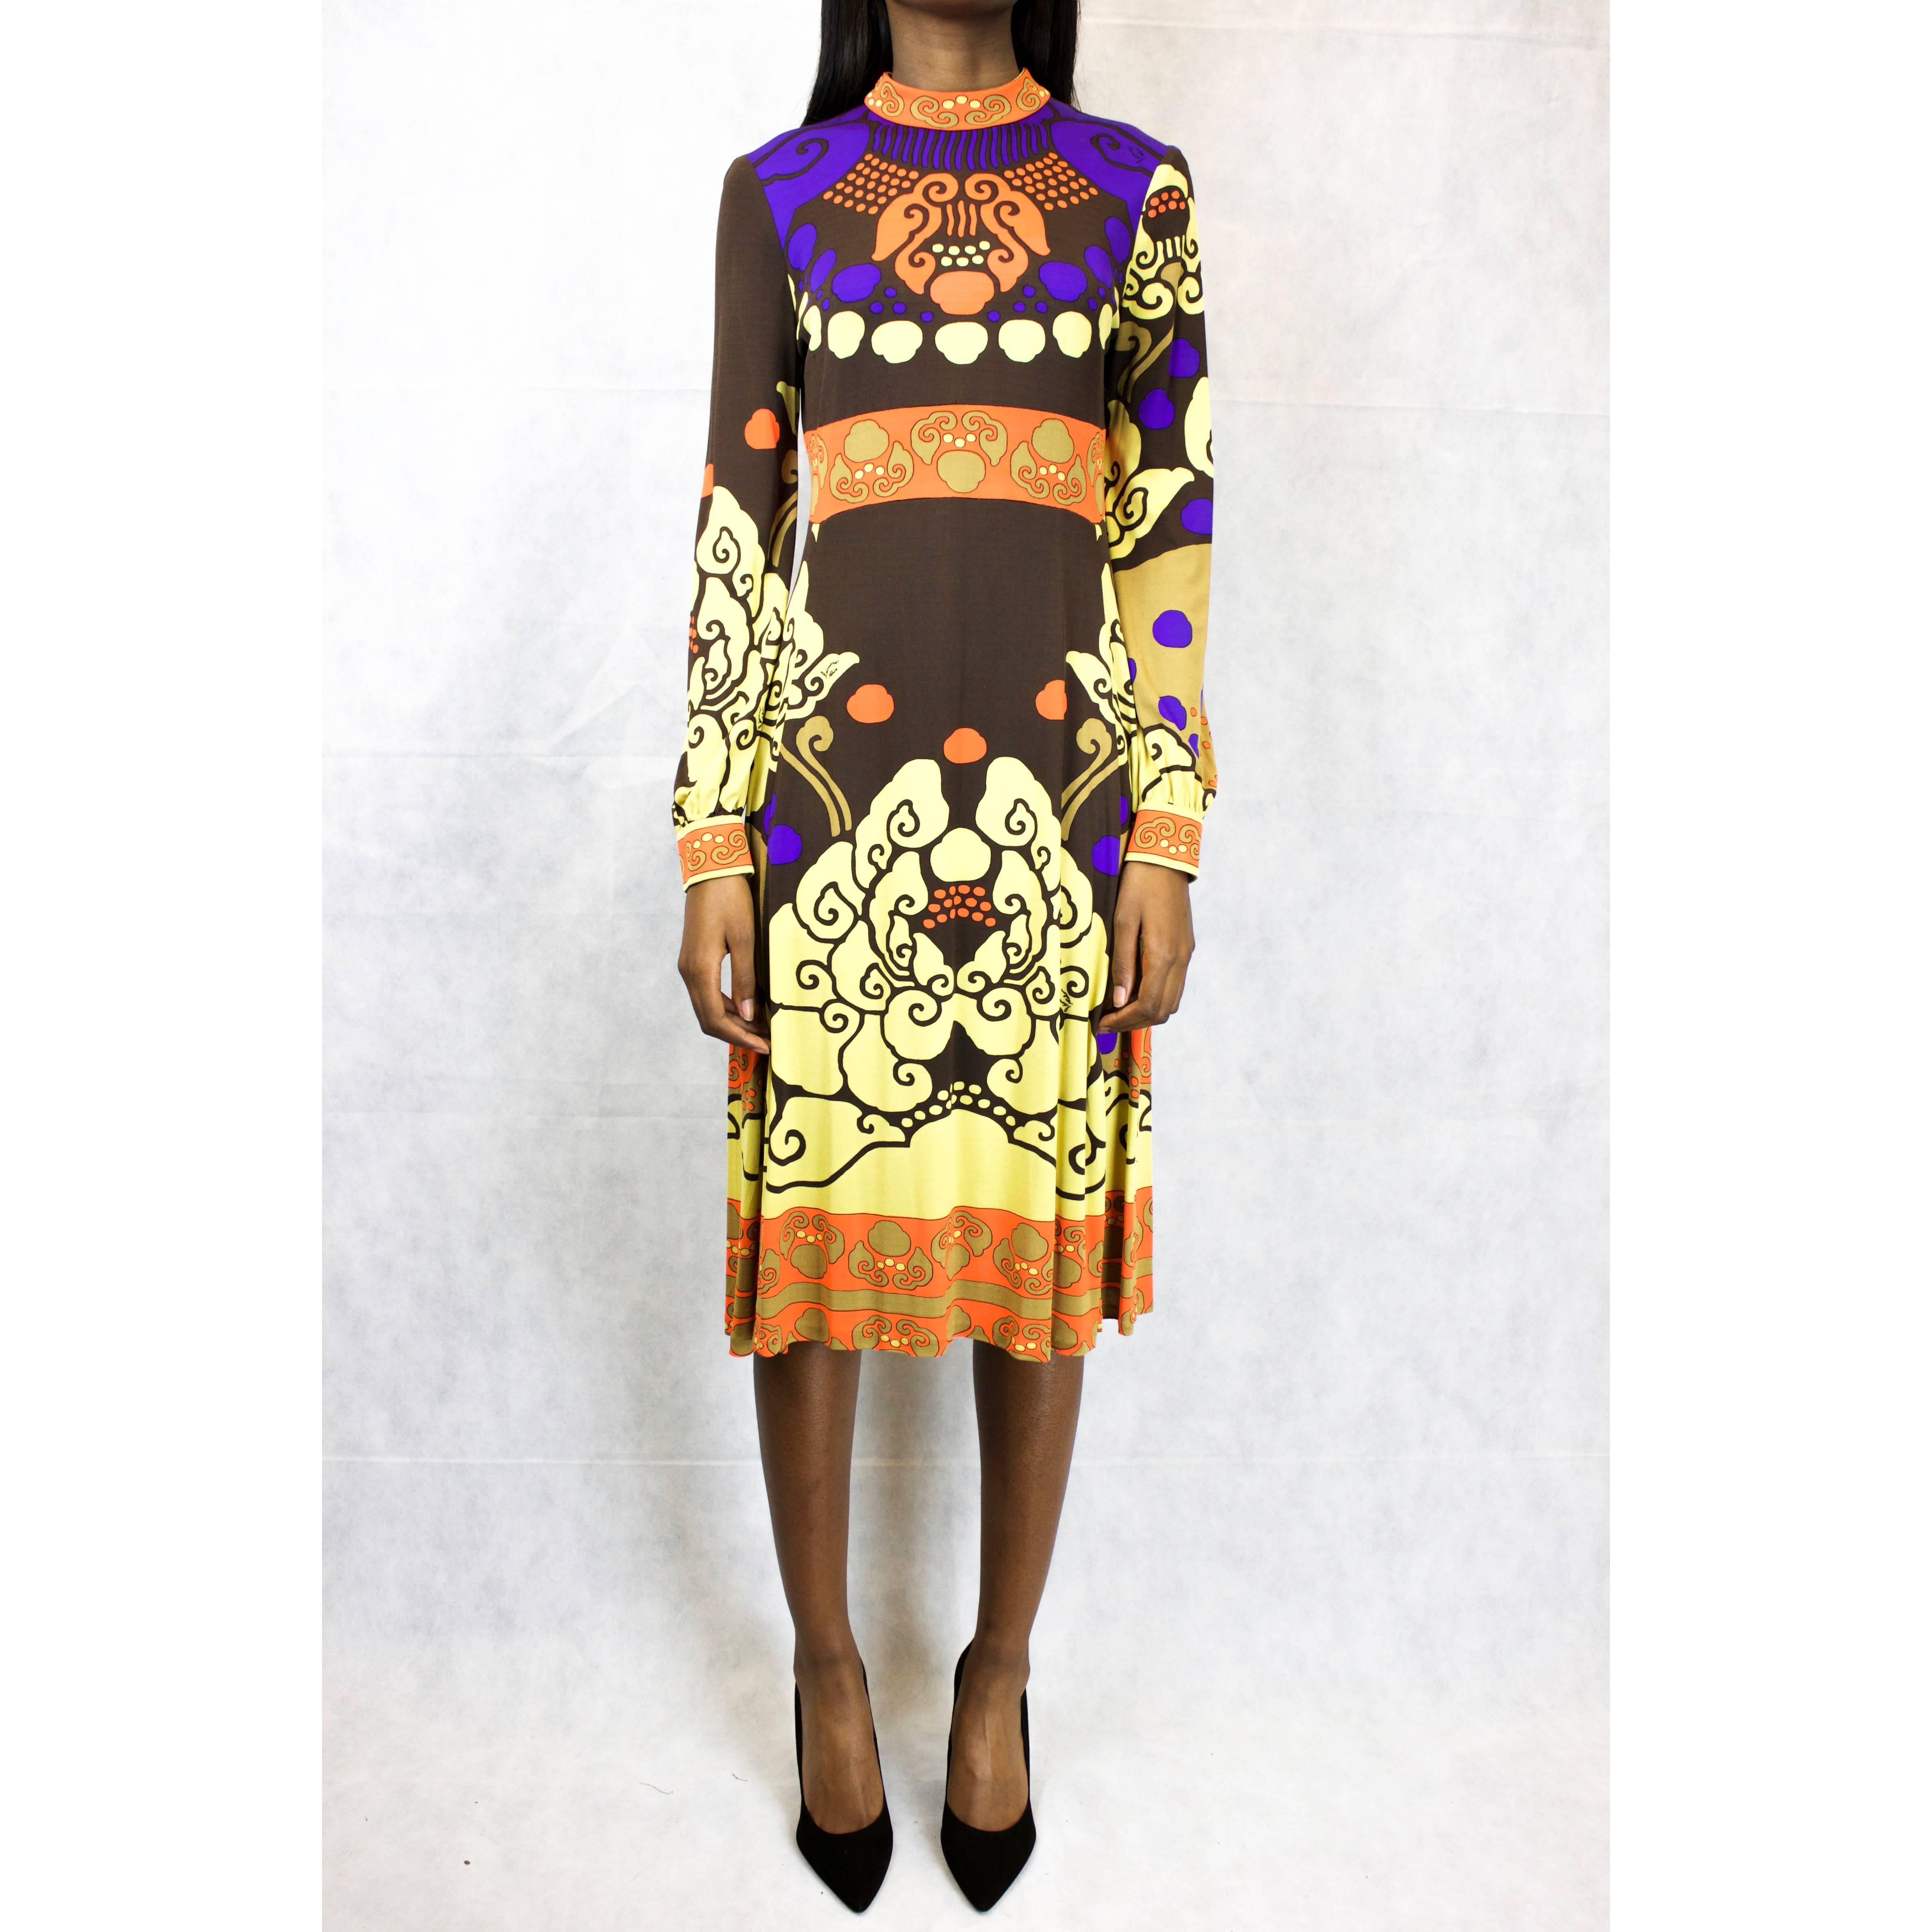 Leonard Paris Silk Jersey Dress

This dress is constructed from silk jersey printed with a orange, dark chocolate, light chocolate and mustard multi-coloured weave-like ethnic pattern. Ten small Leonard signatures are also printed onto the dress.